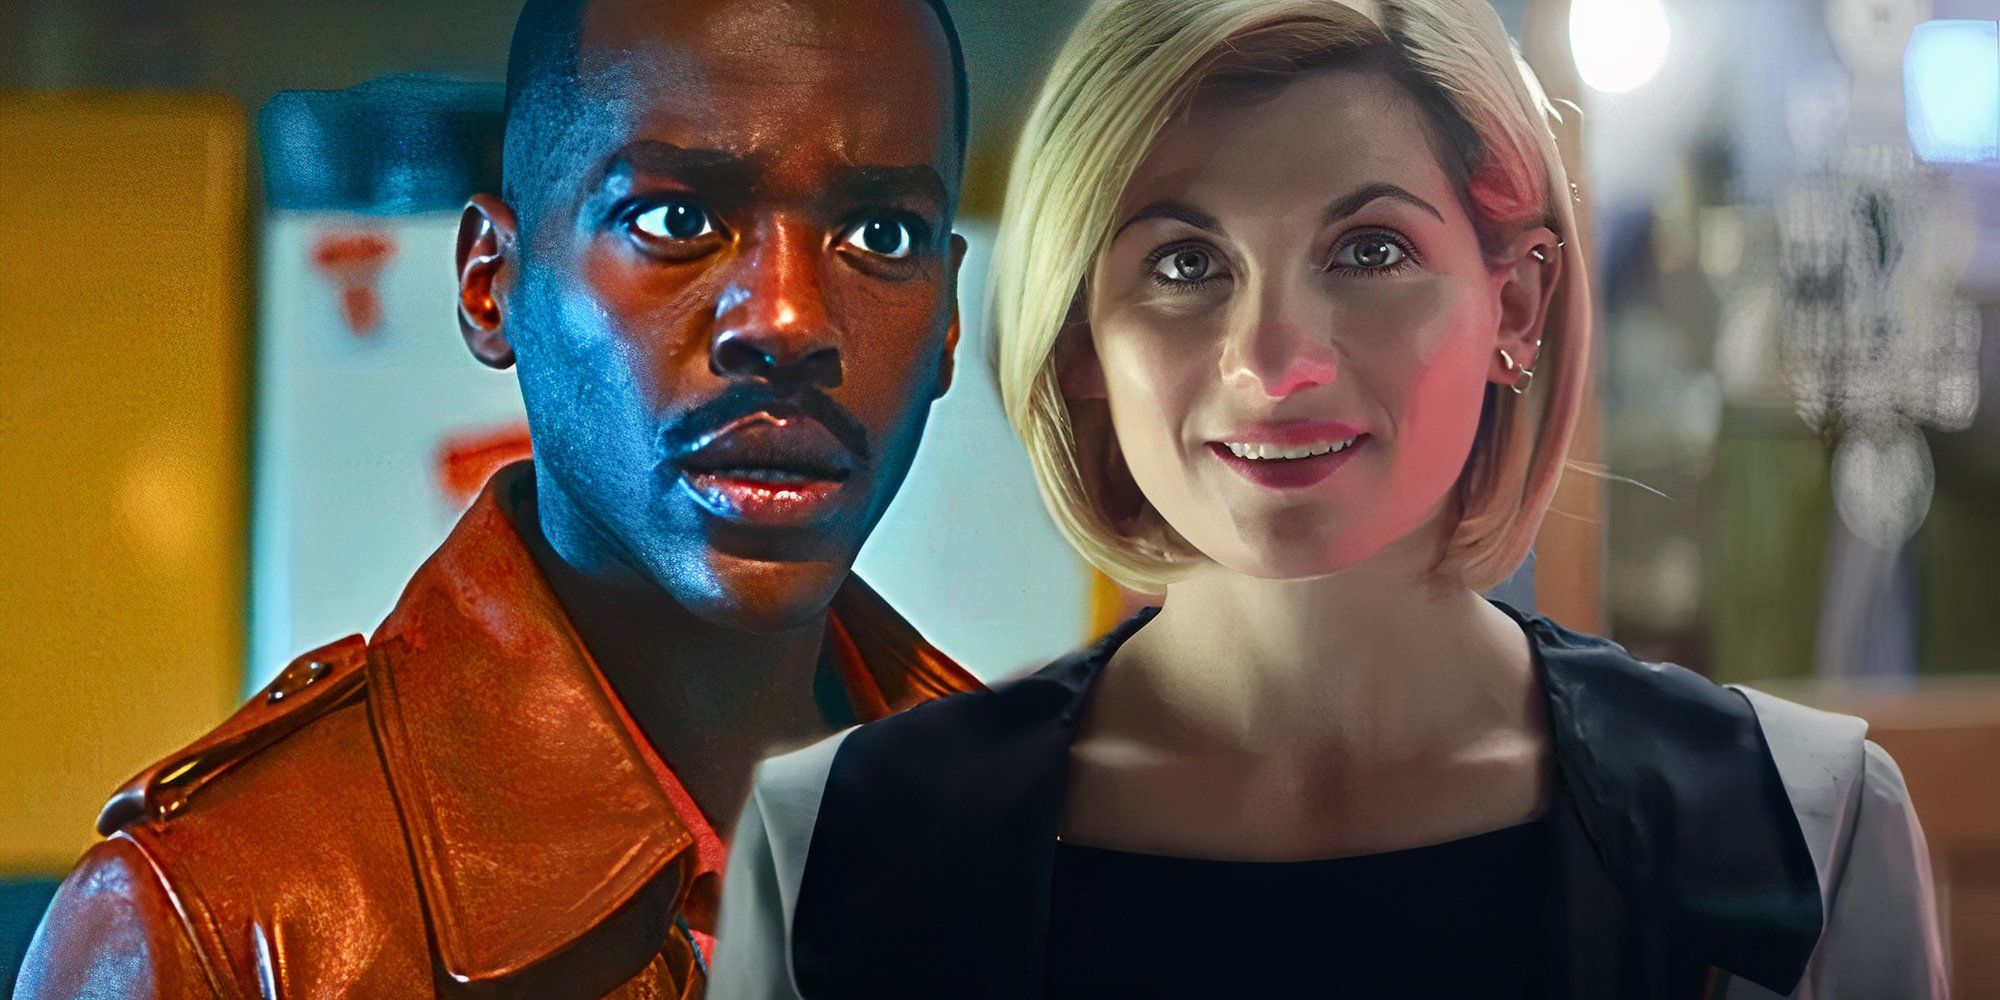 Ncuti Gatwa looking shocked as the Fifteenth Doctor next to Jodie Whittaker looking happy as the Thirteenth Doctor in Doctor Who